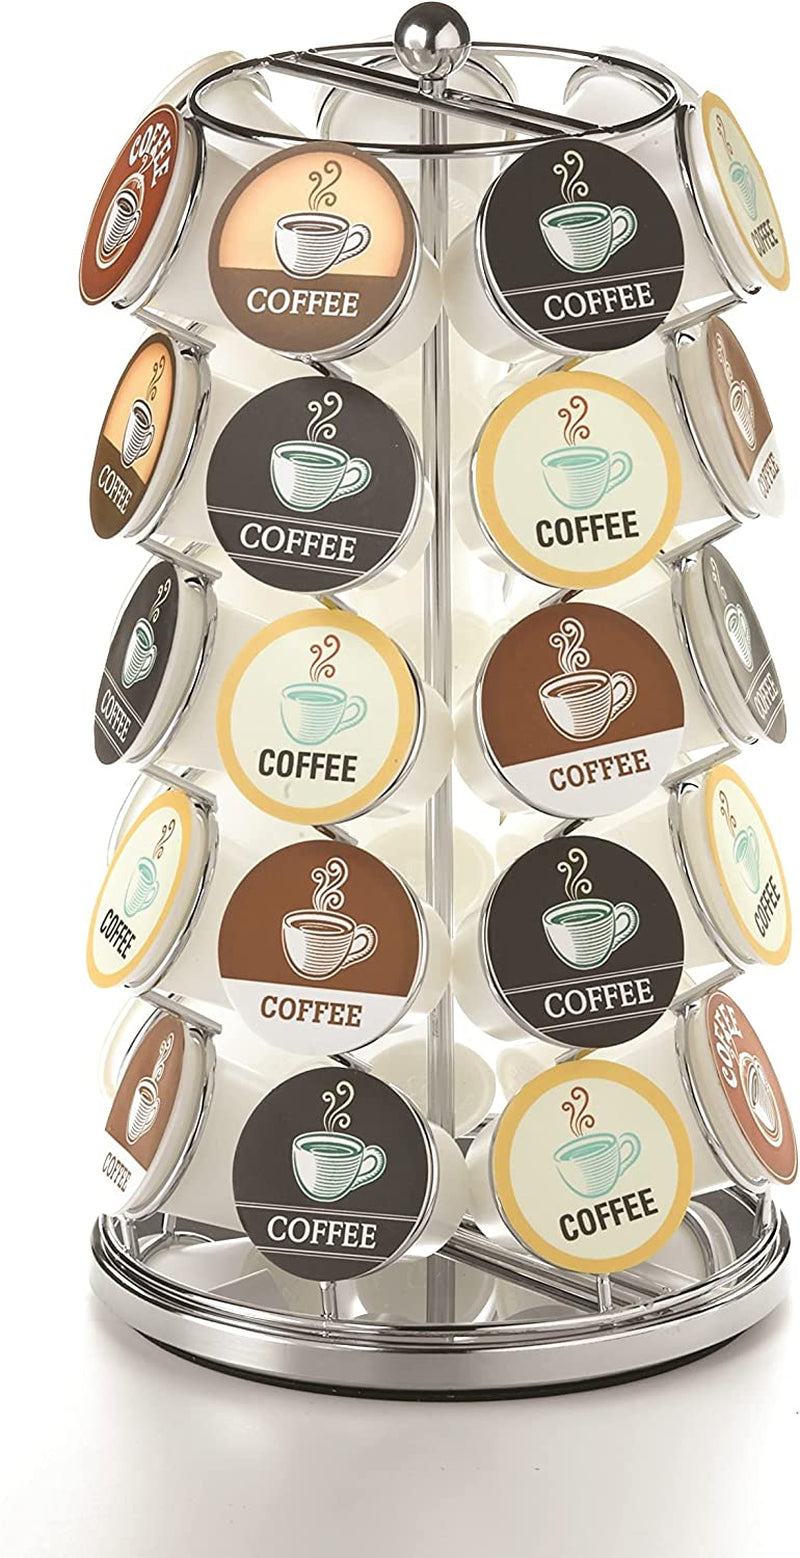 Nifty Coffee Pod Carousel – Compatible with K-Cups, 35 Pod Pack Storage, Spins 360-Degrees, Lazy Susan Platform, Modern Black Design, Home or Office Kitchen Counter Organizer Home & Garden > Household Supplies > Storage & Organization NIFTY 35 Pod Capacity|Chrome  